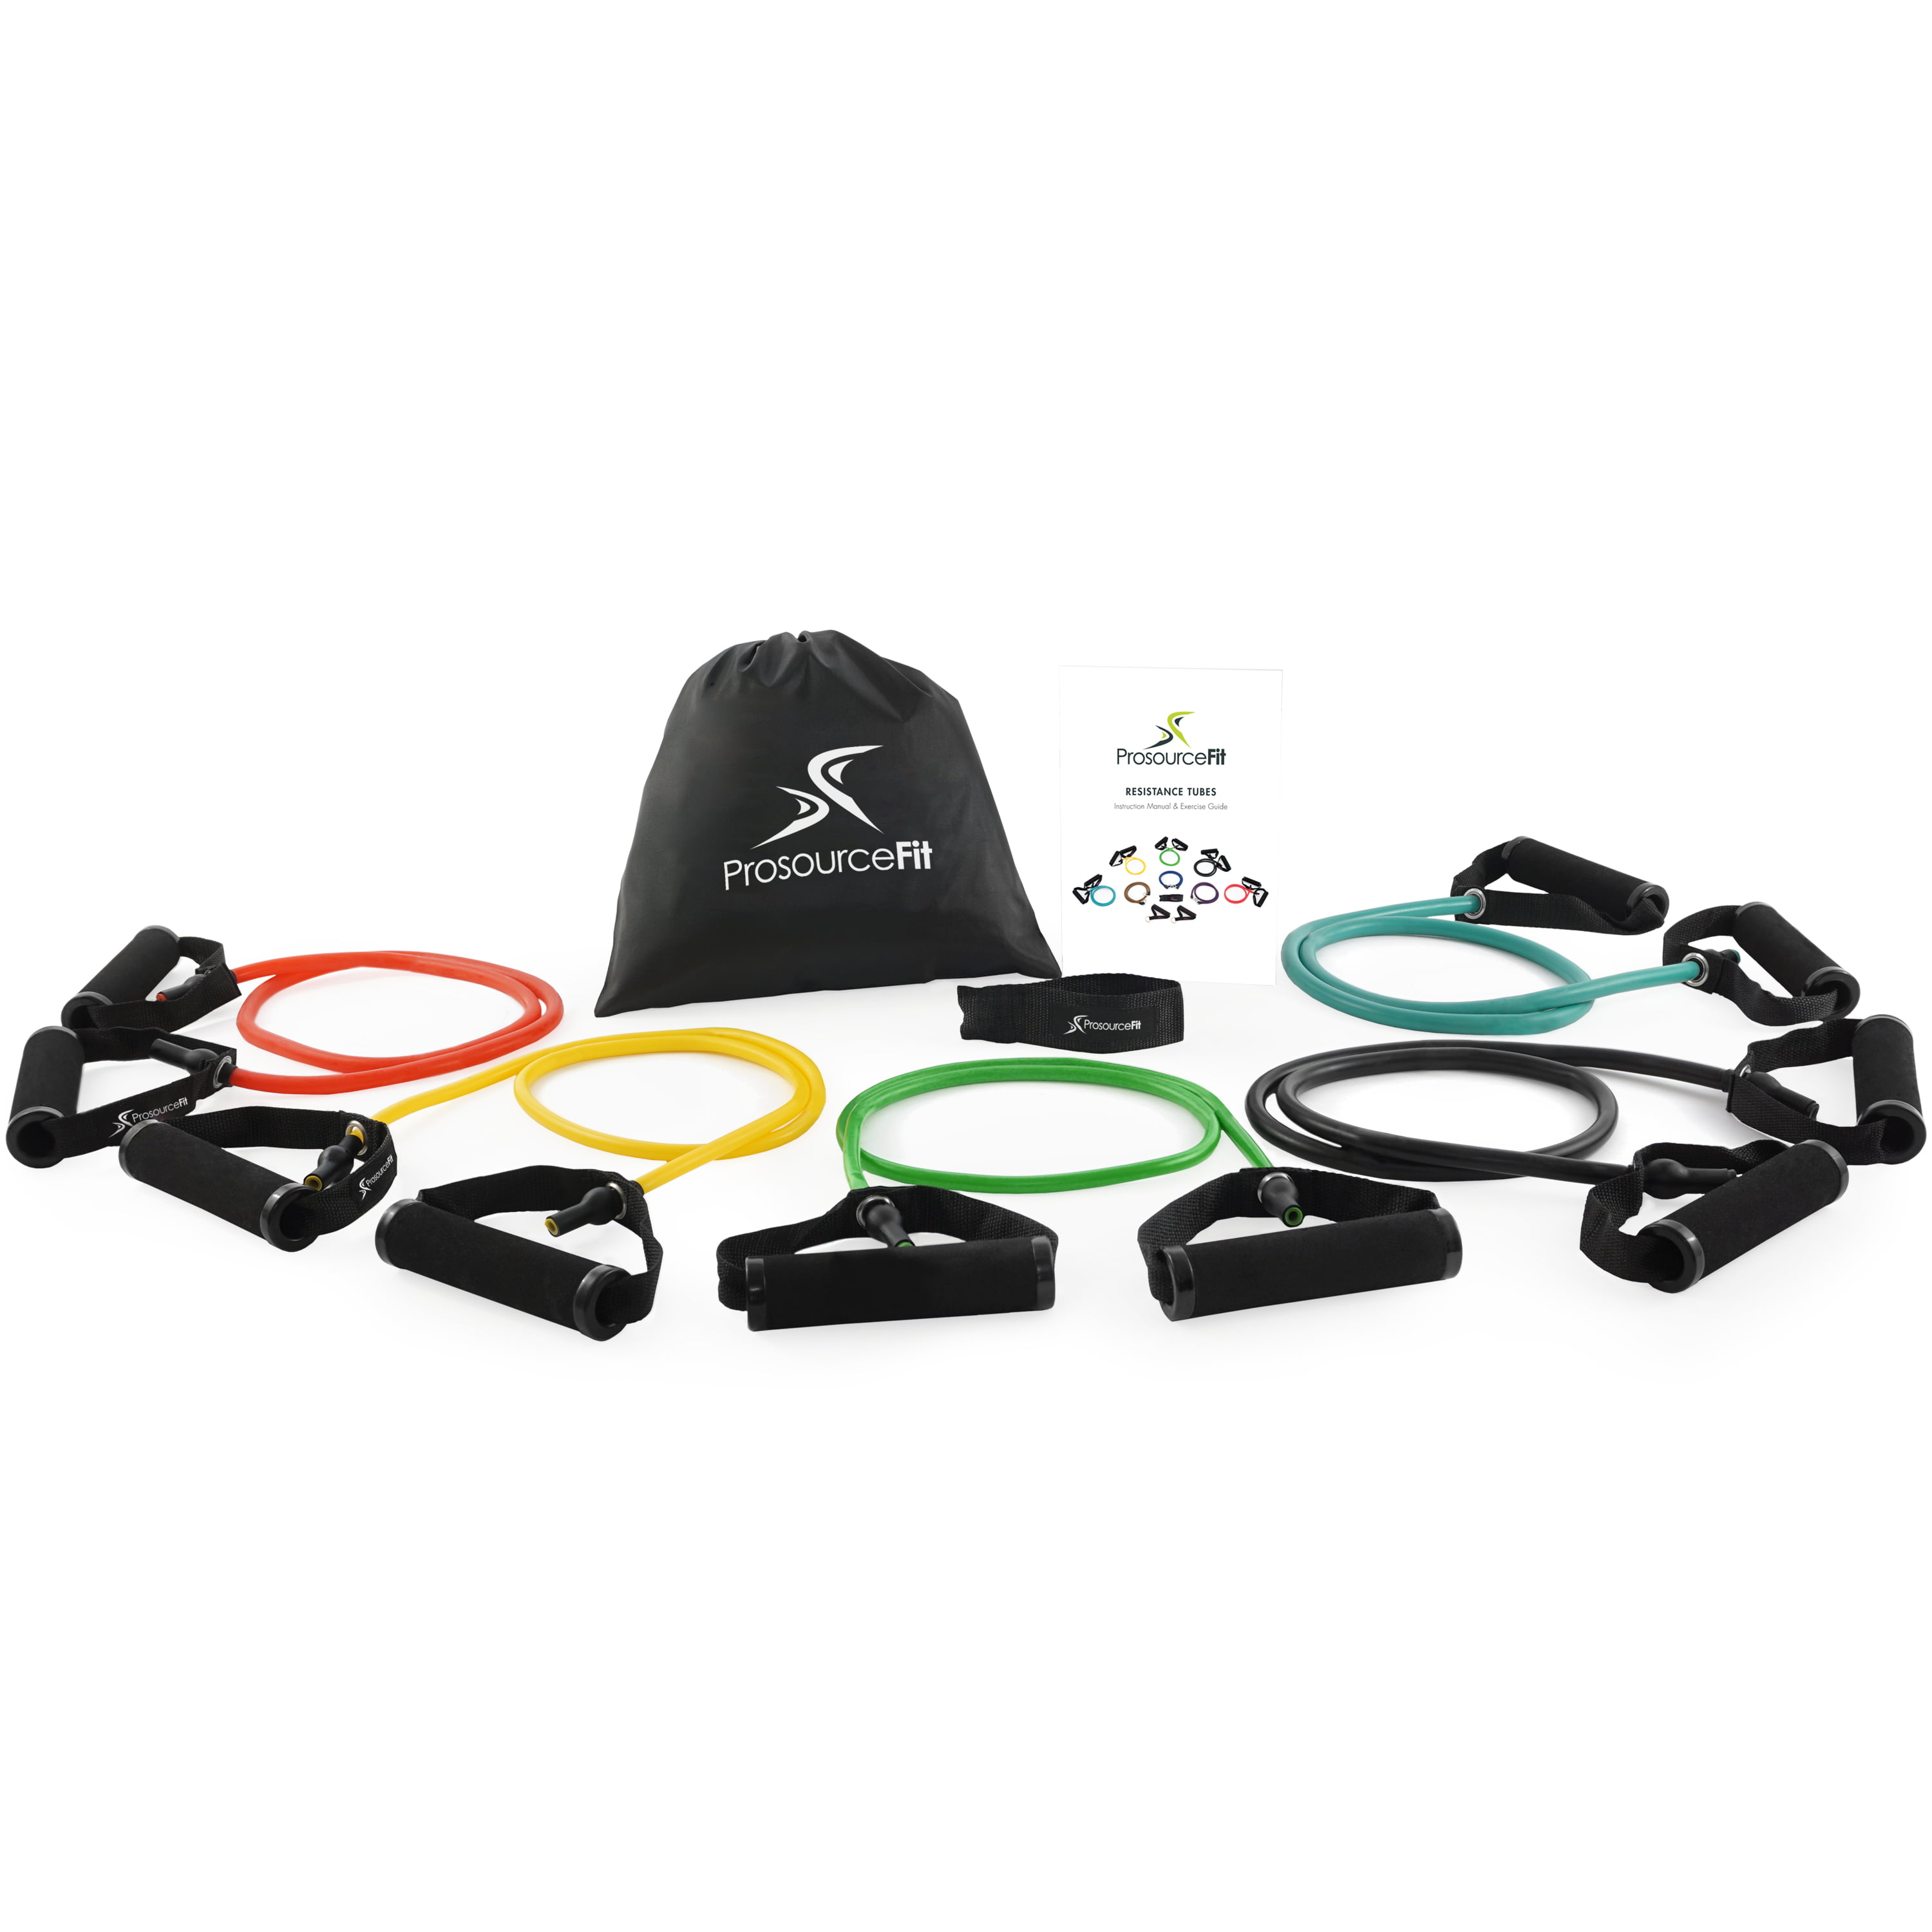 Exercise Fitness Tube Resistance Bands Set Strength Training Slimming Product@ 